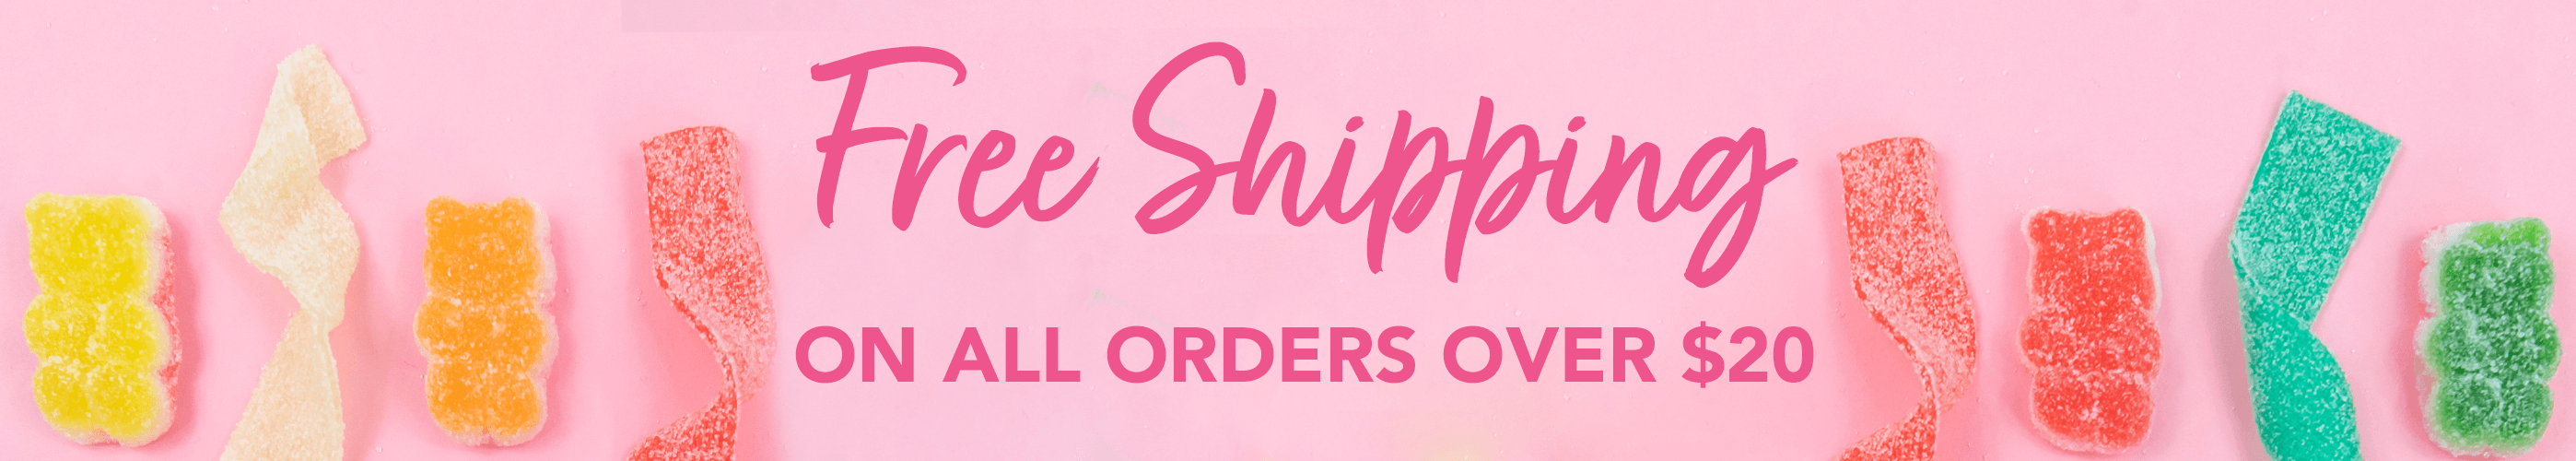 Free Shipping on all orders over $20